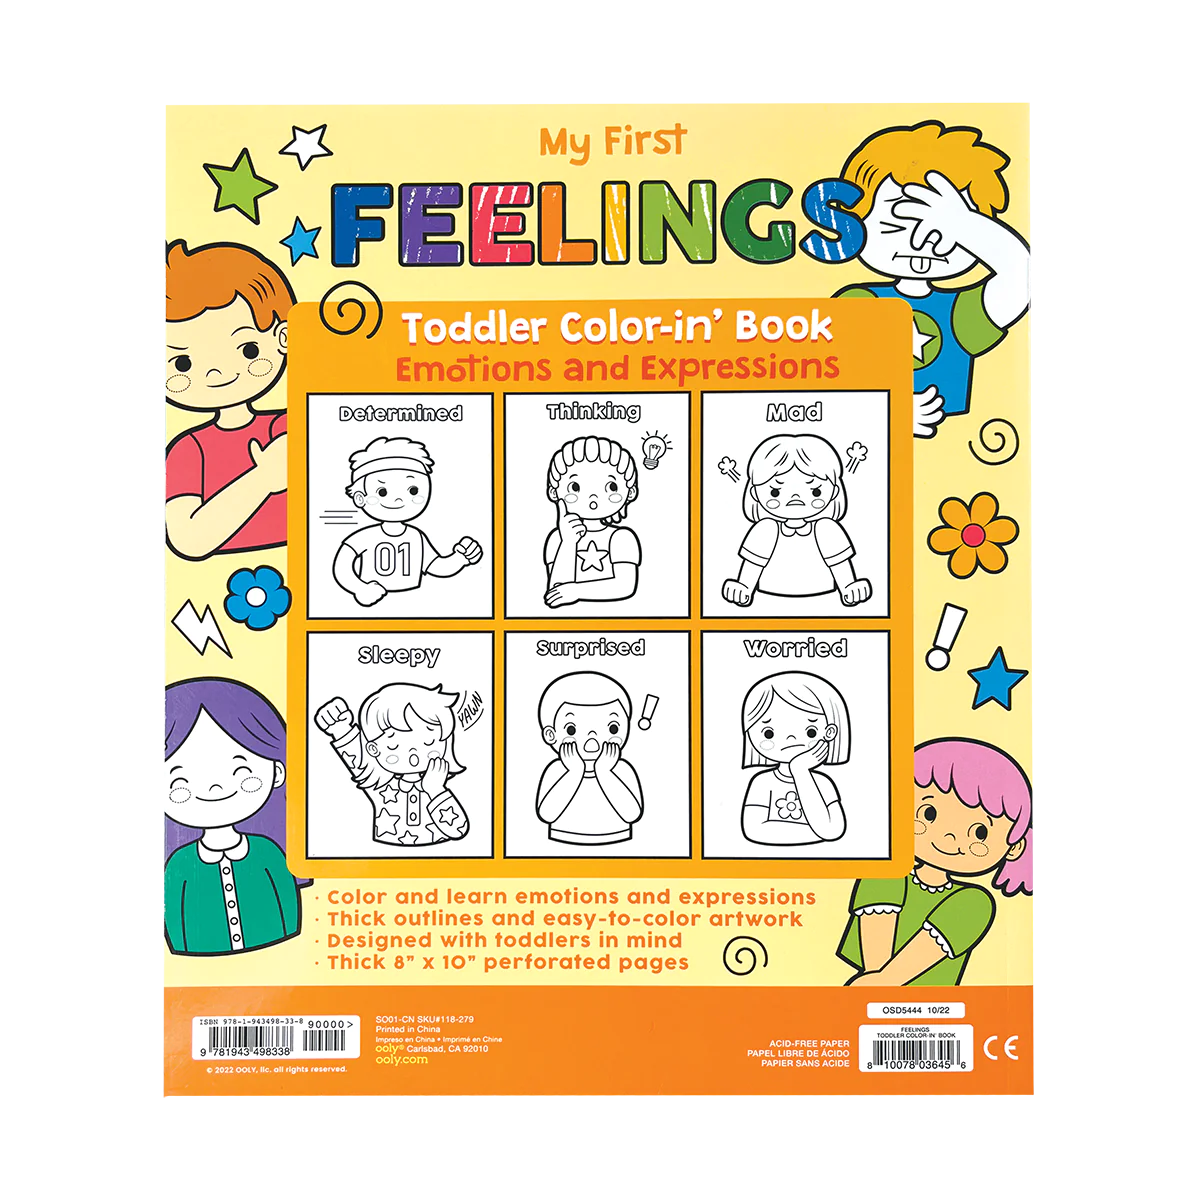 Toddler Color-in Book - My First Feelings